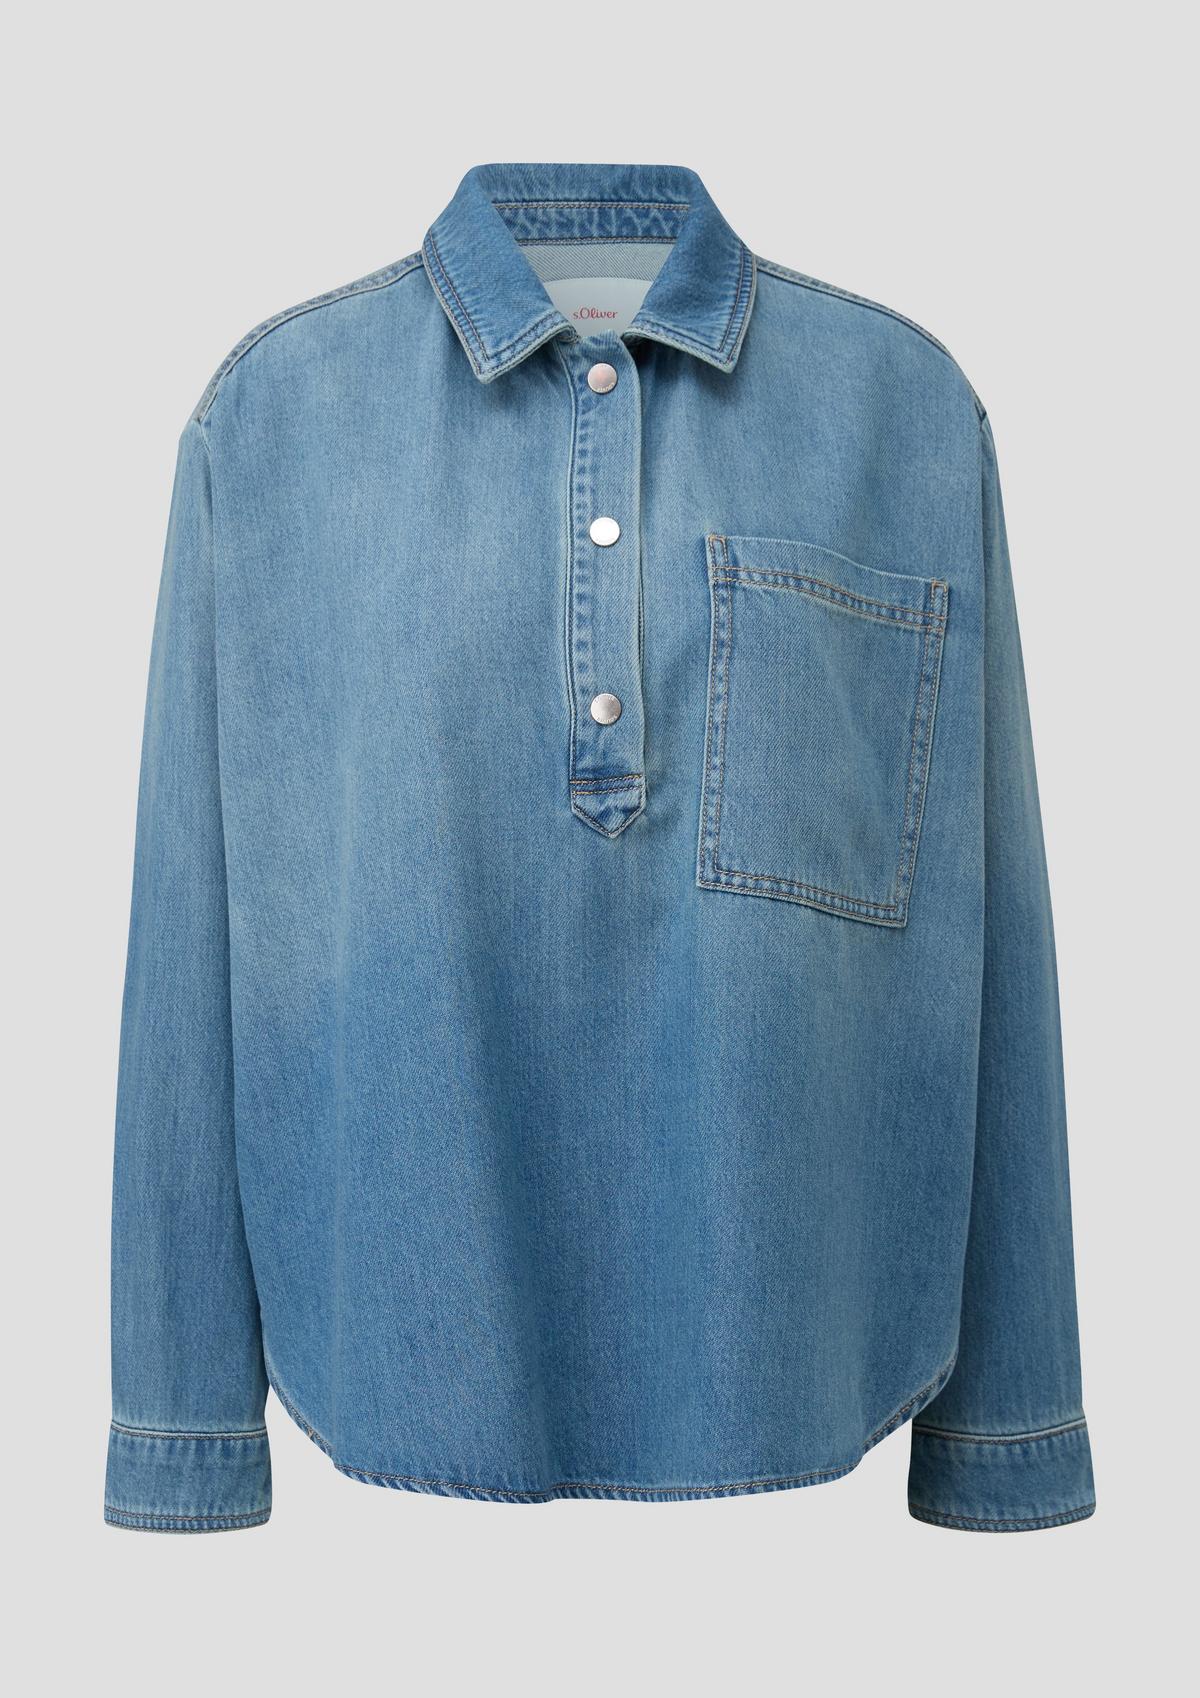 s.Oliver Jeans shirt jacket in a loose fit